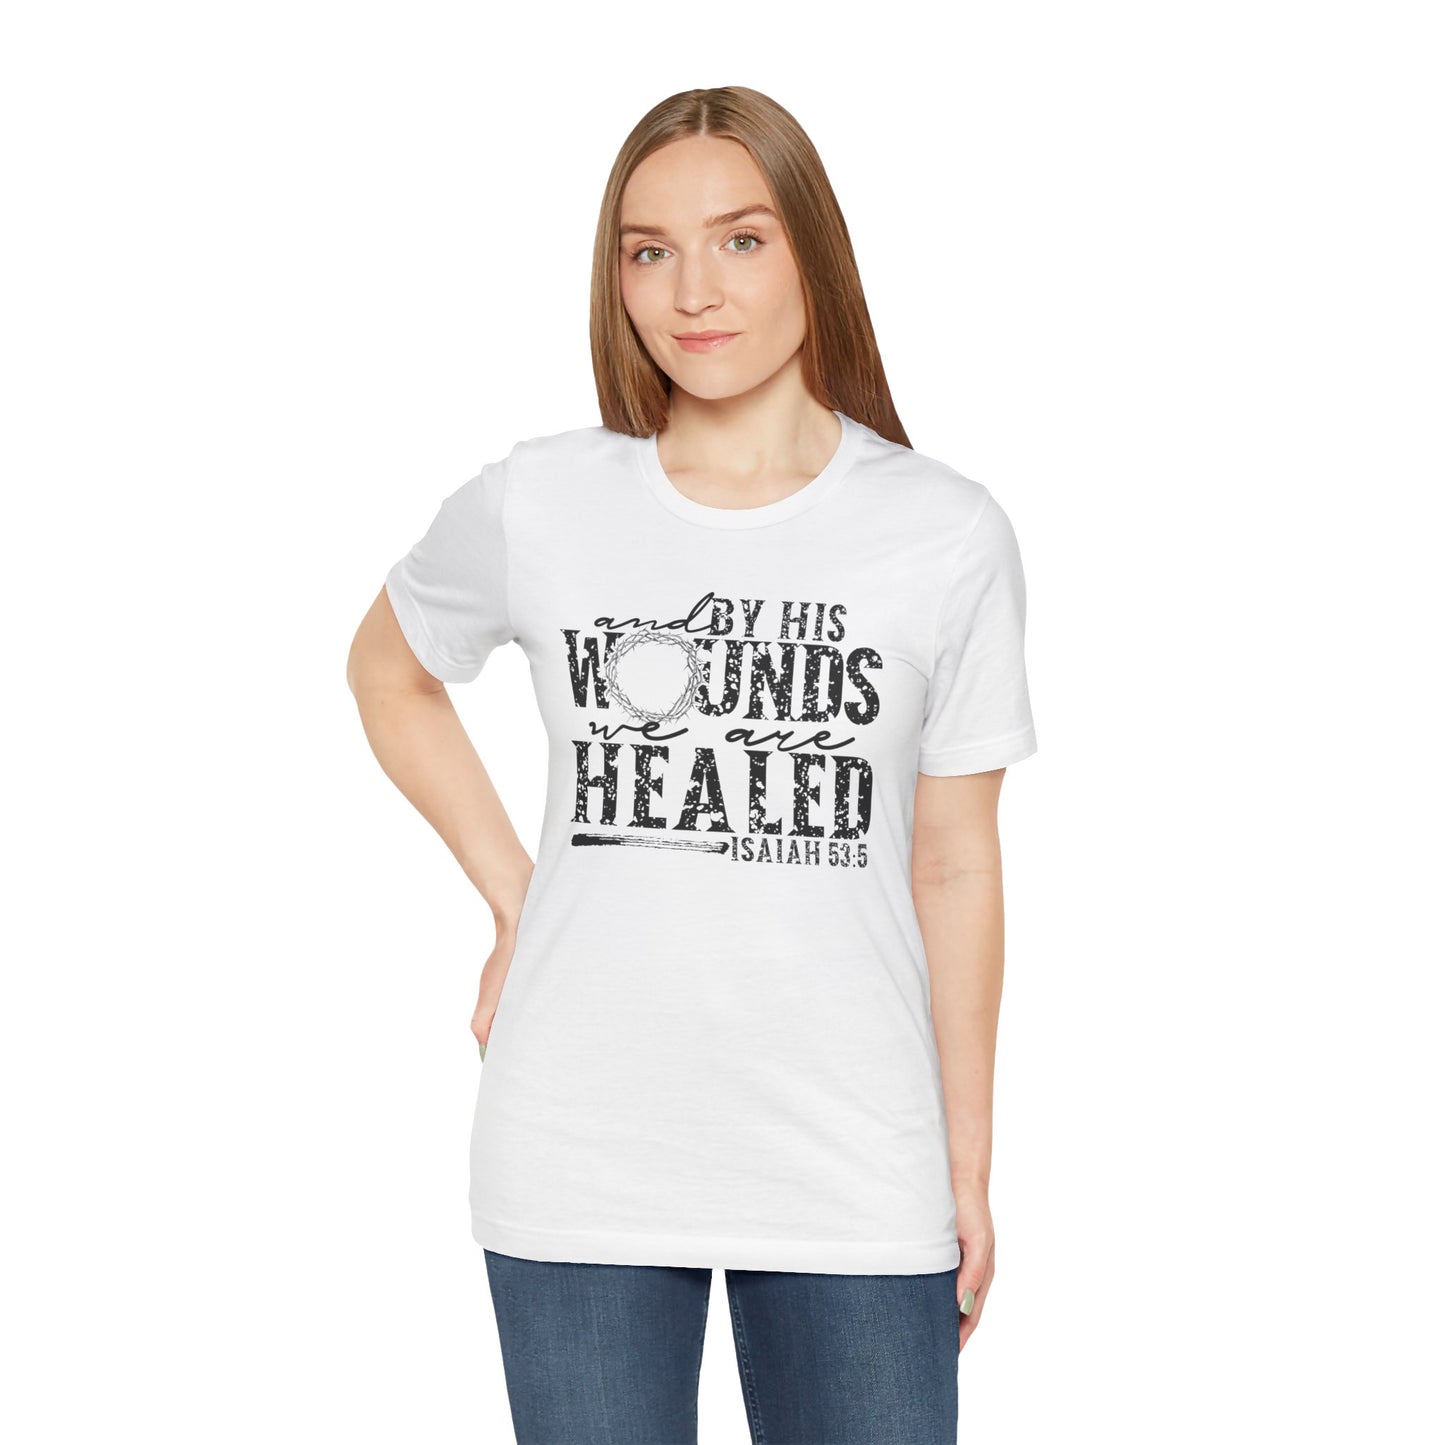 By His Wounds We Are Healed Shirt